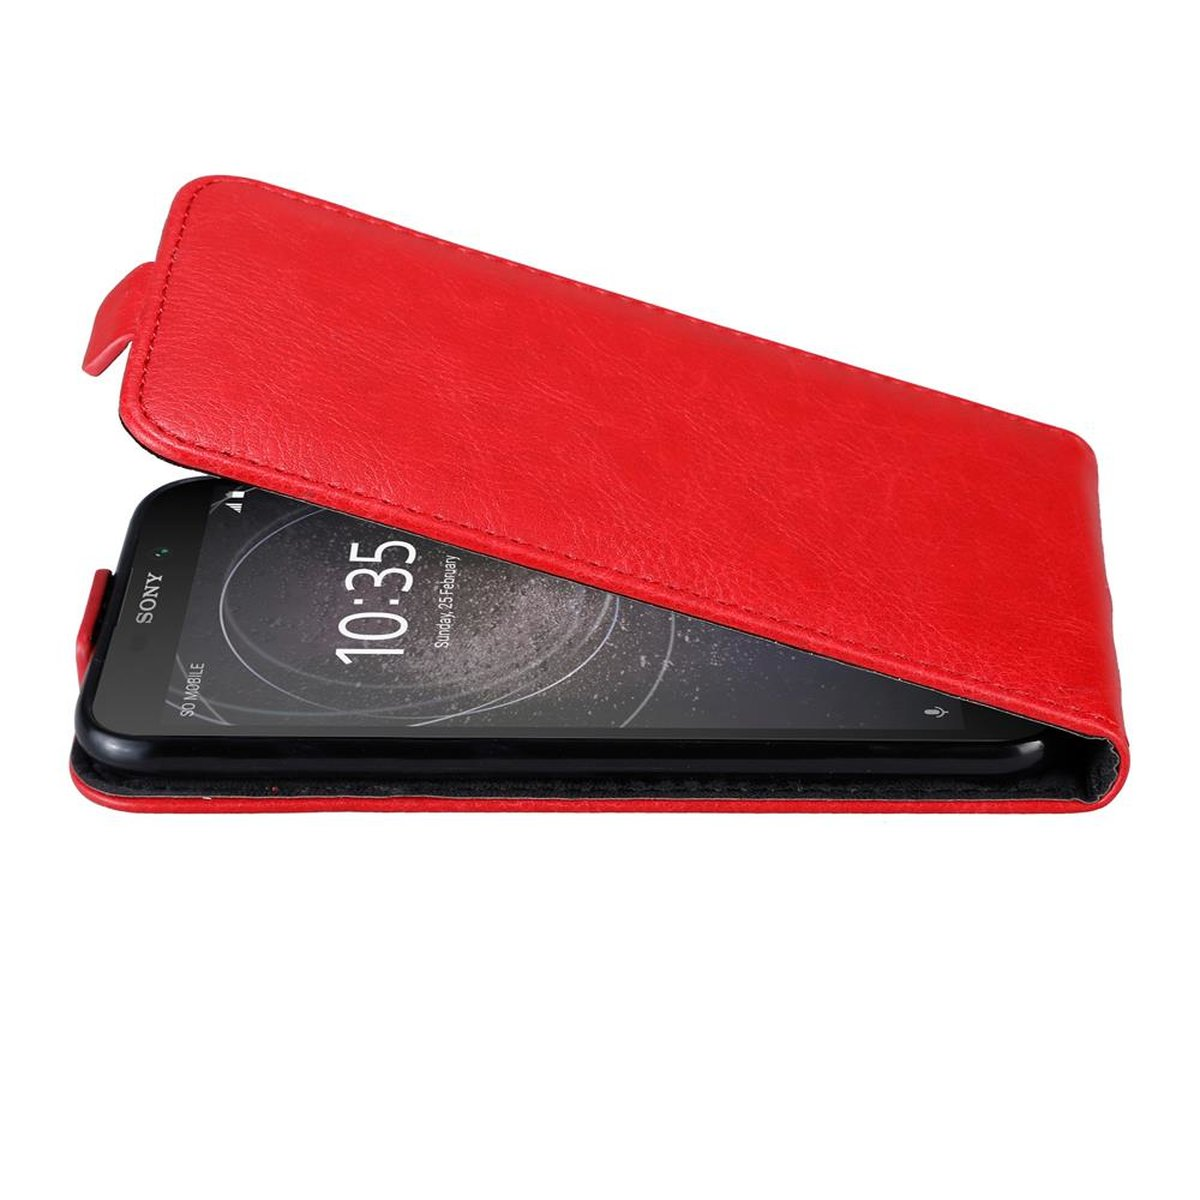 Cover, CADORABO Style, APFEL Sony, ROT Flip im Hülle Flip Xperia L2,